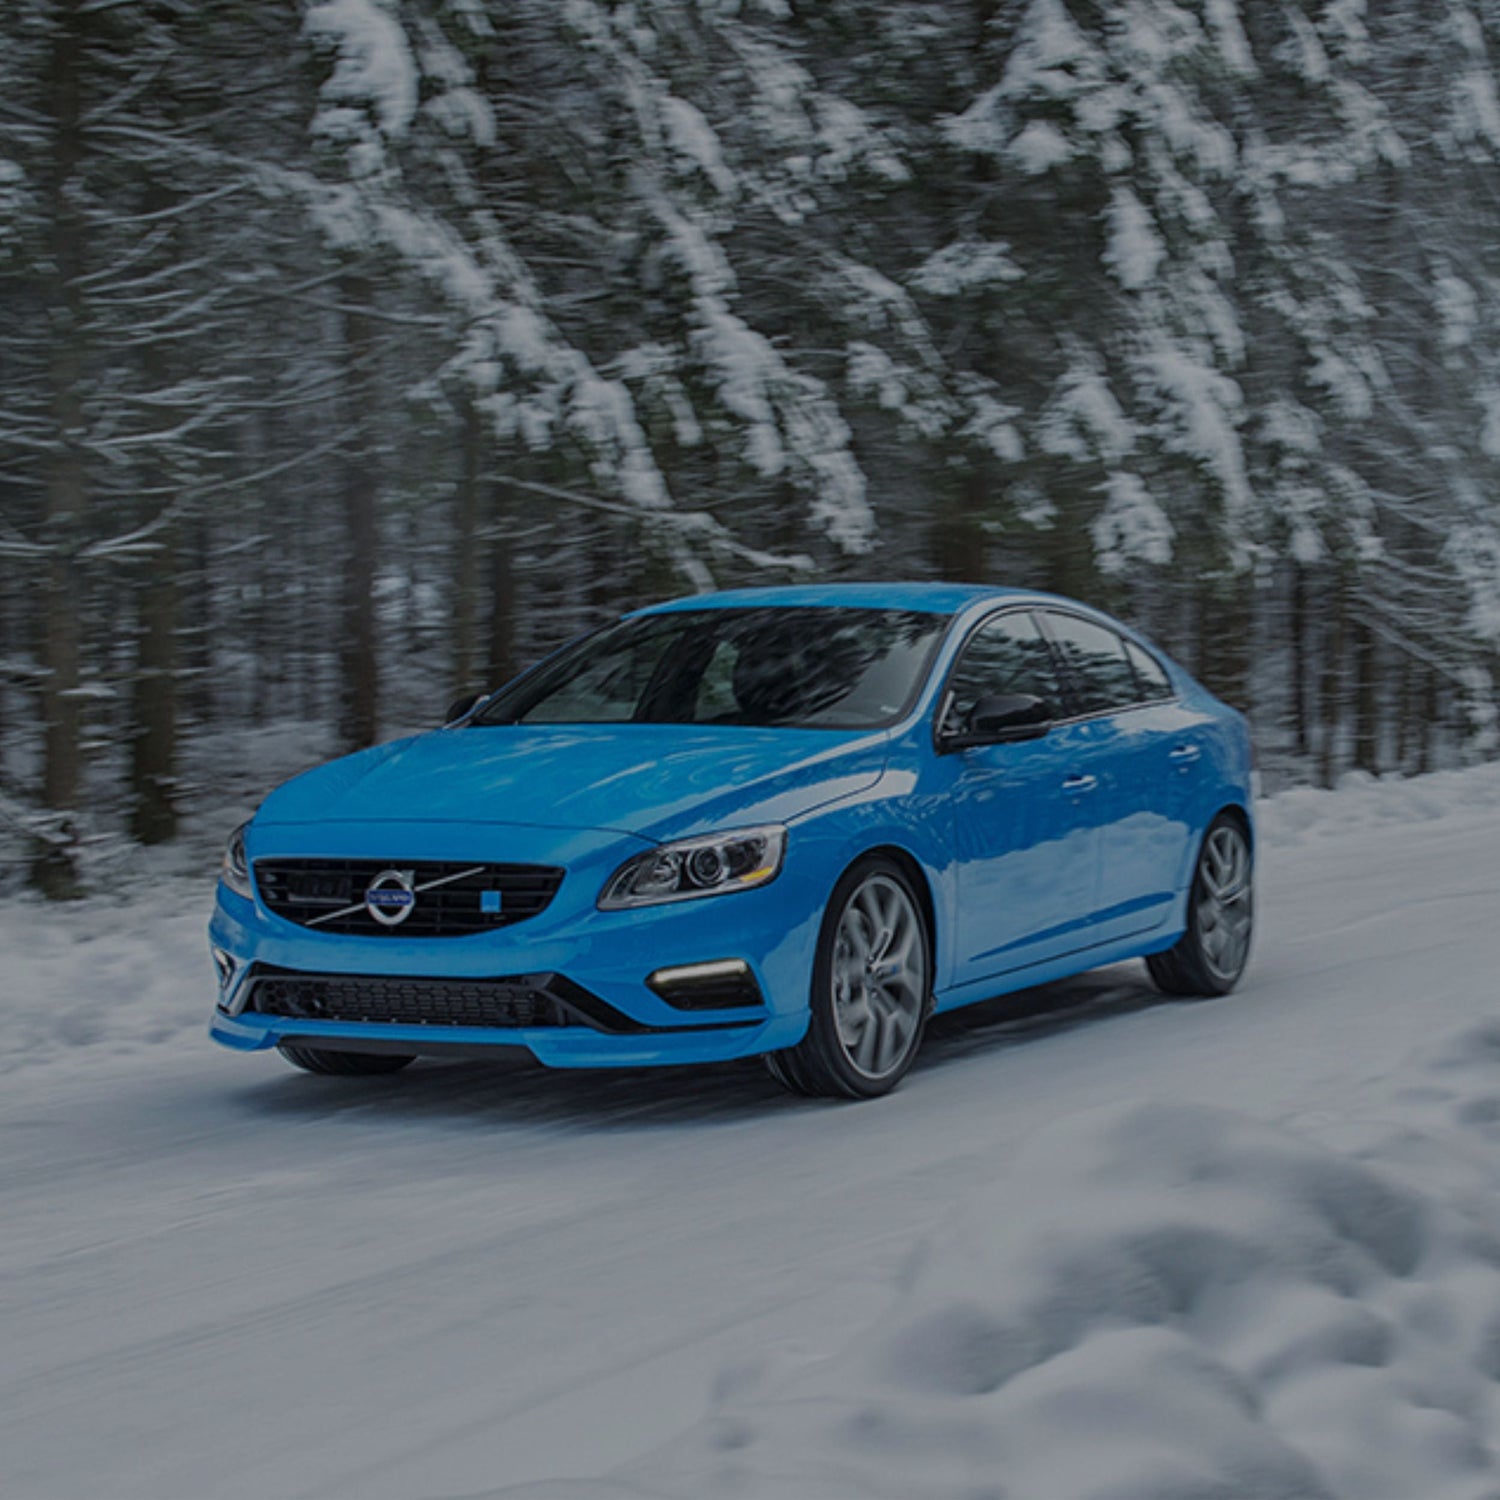 Seasonal tire change at home index, Polestar with snow tires driving on a snowy road.